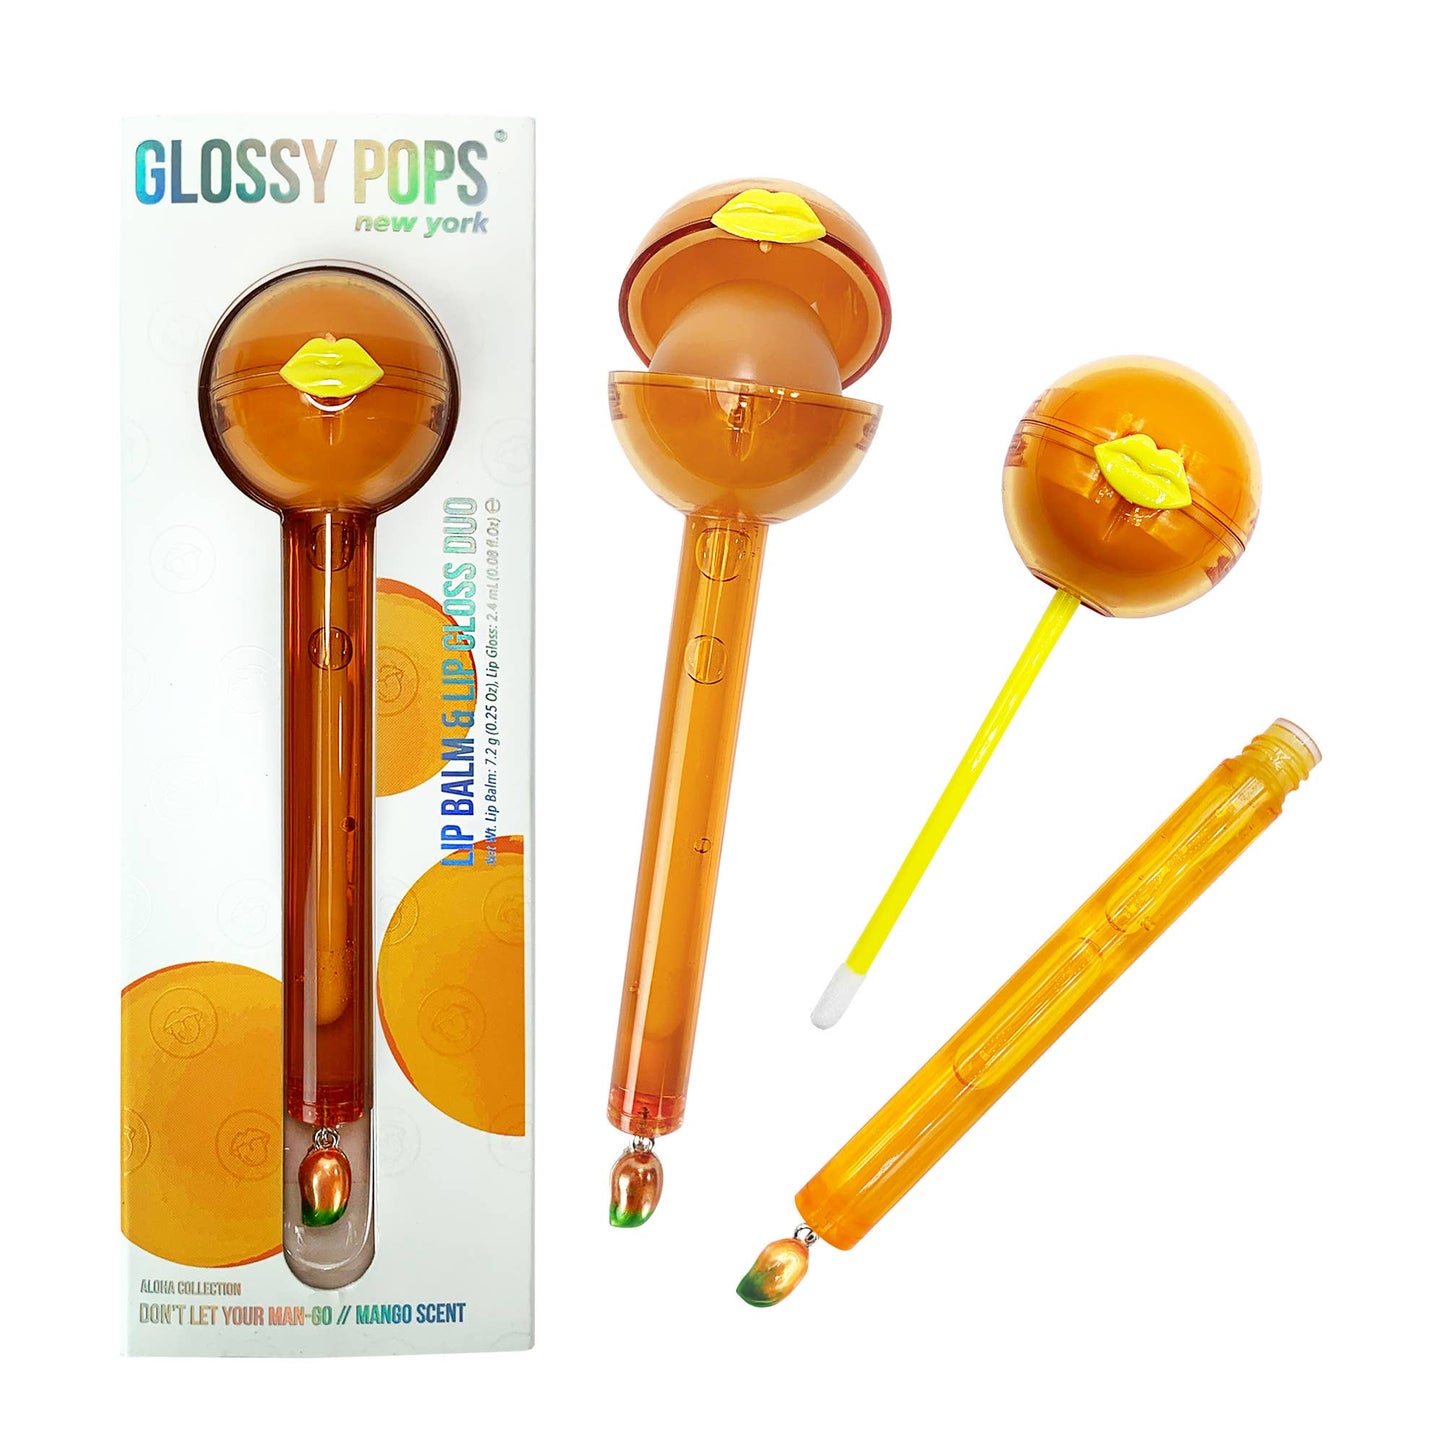 Glossy Pops - Don't Let Your Man-Go Glossy Pop